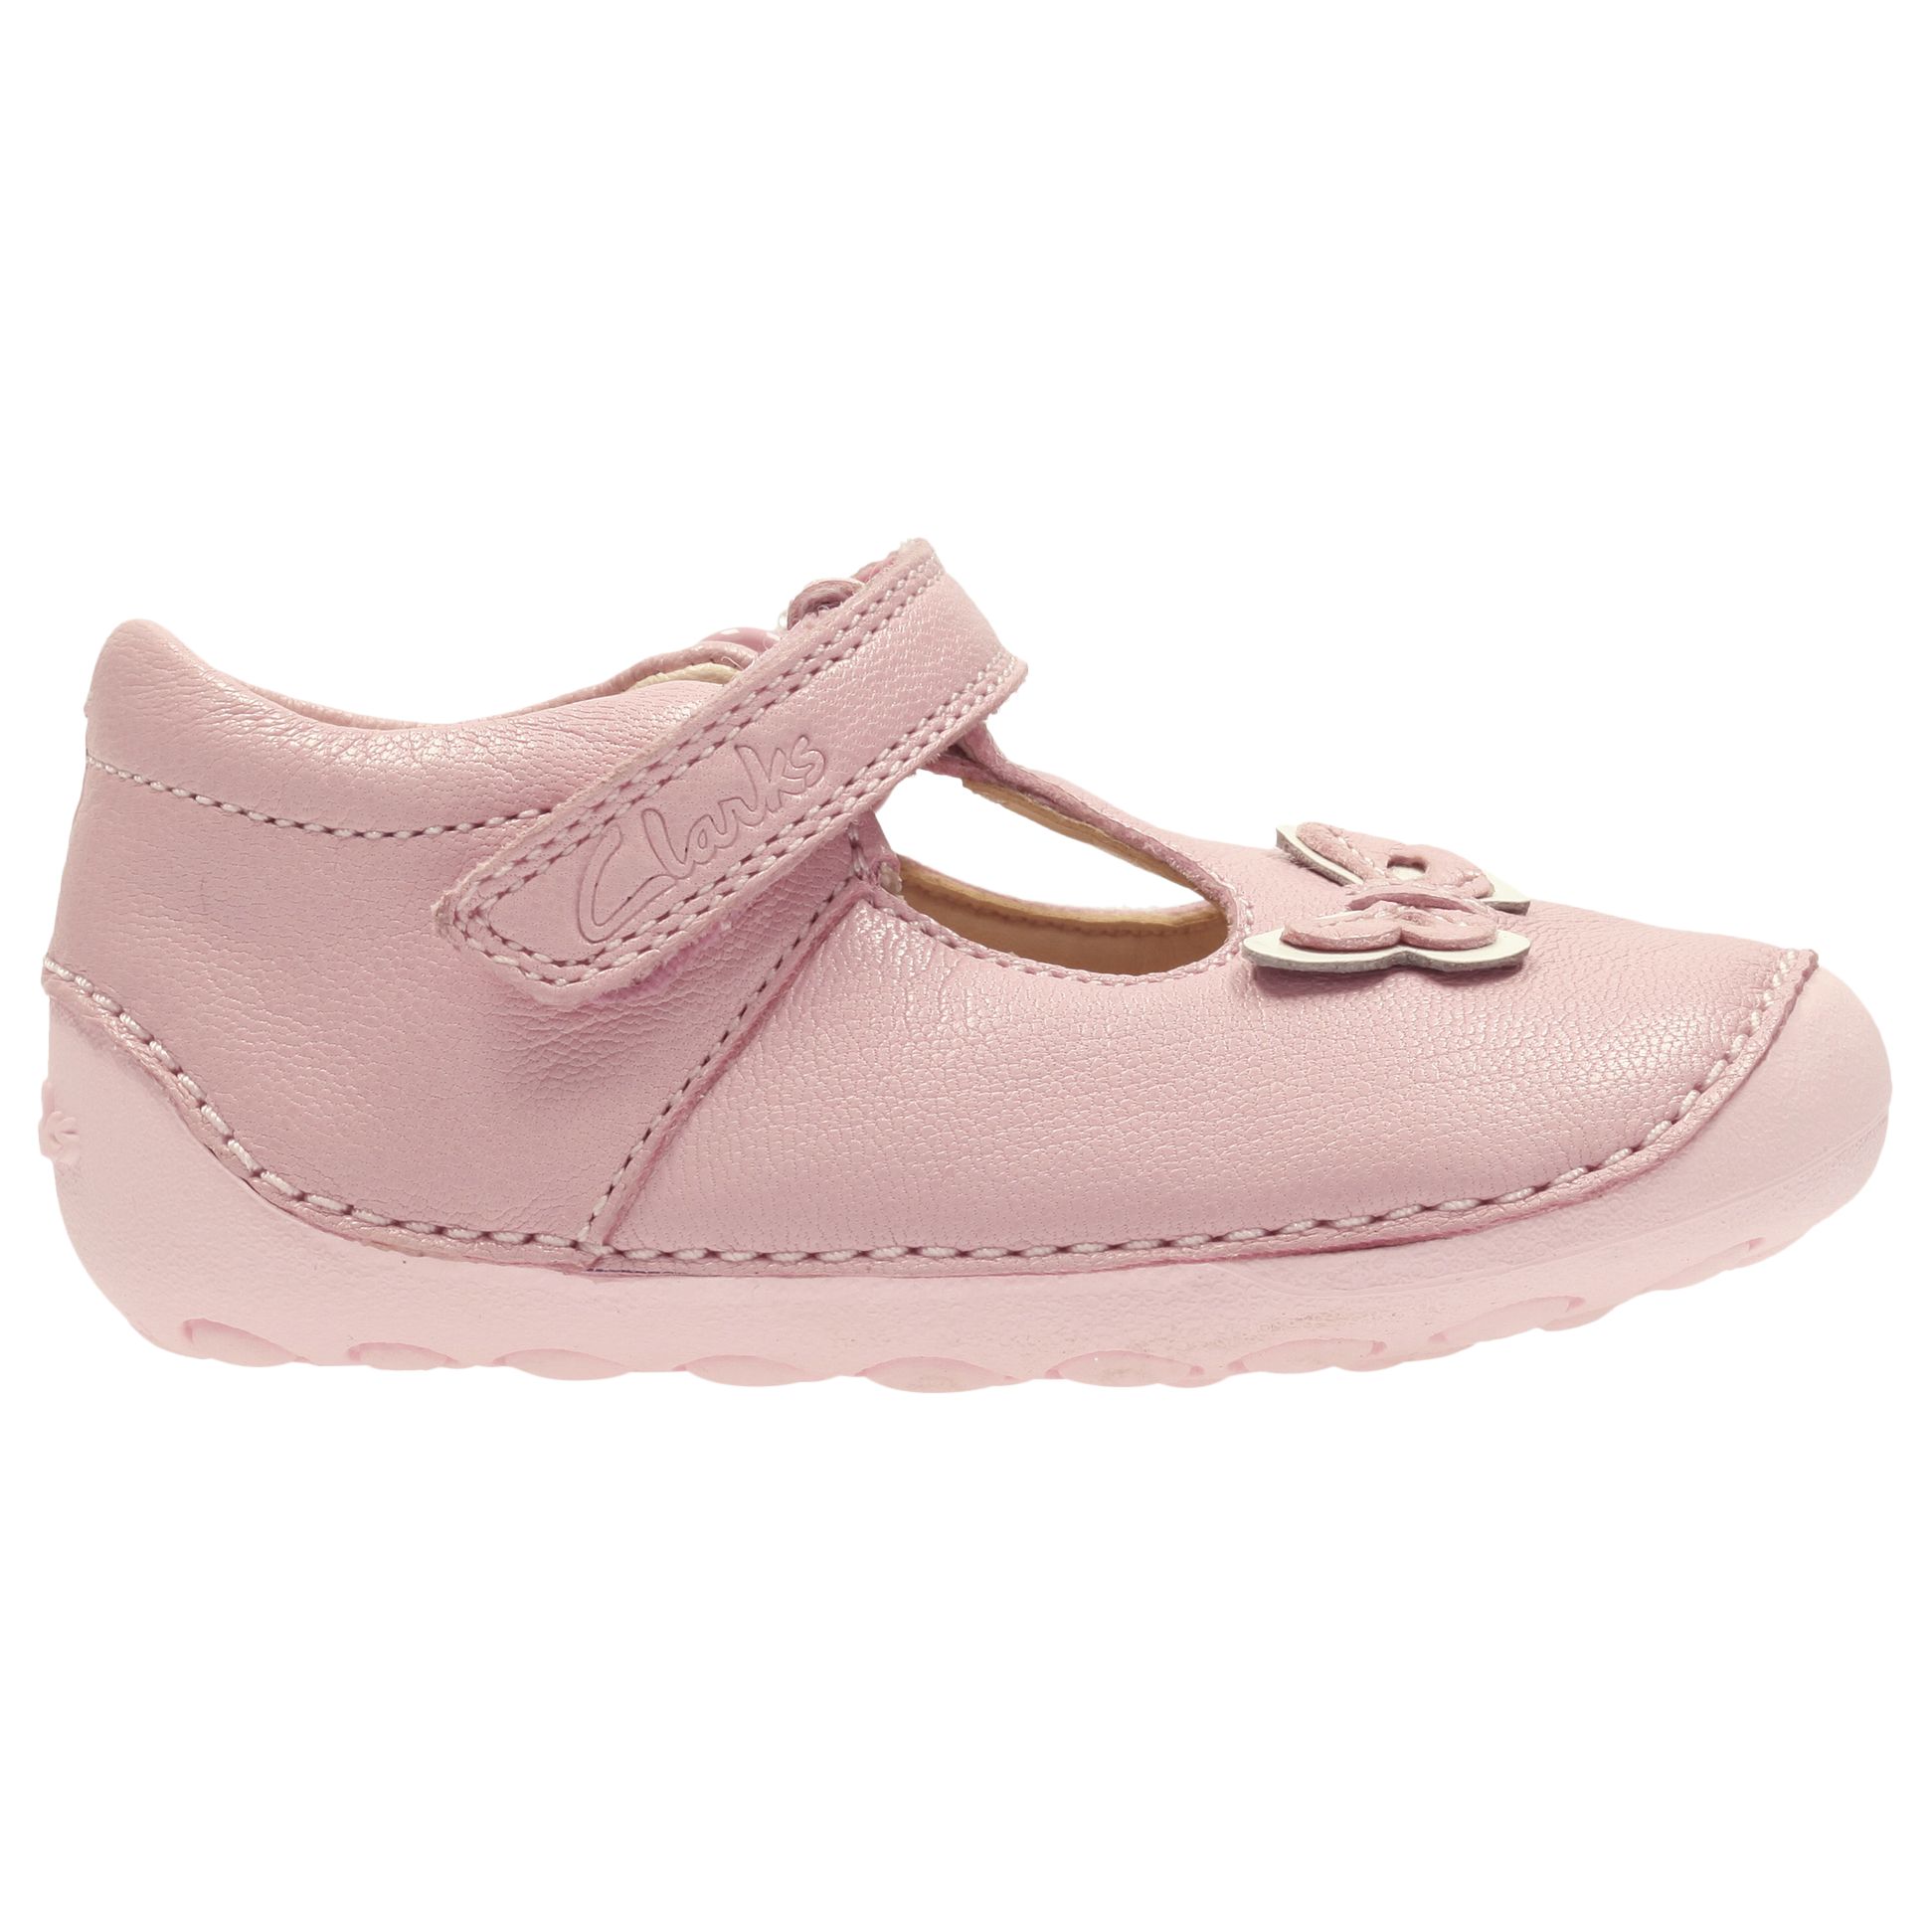 clarks baby shoes online